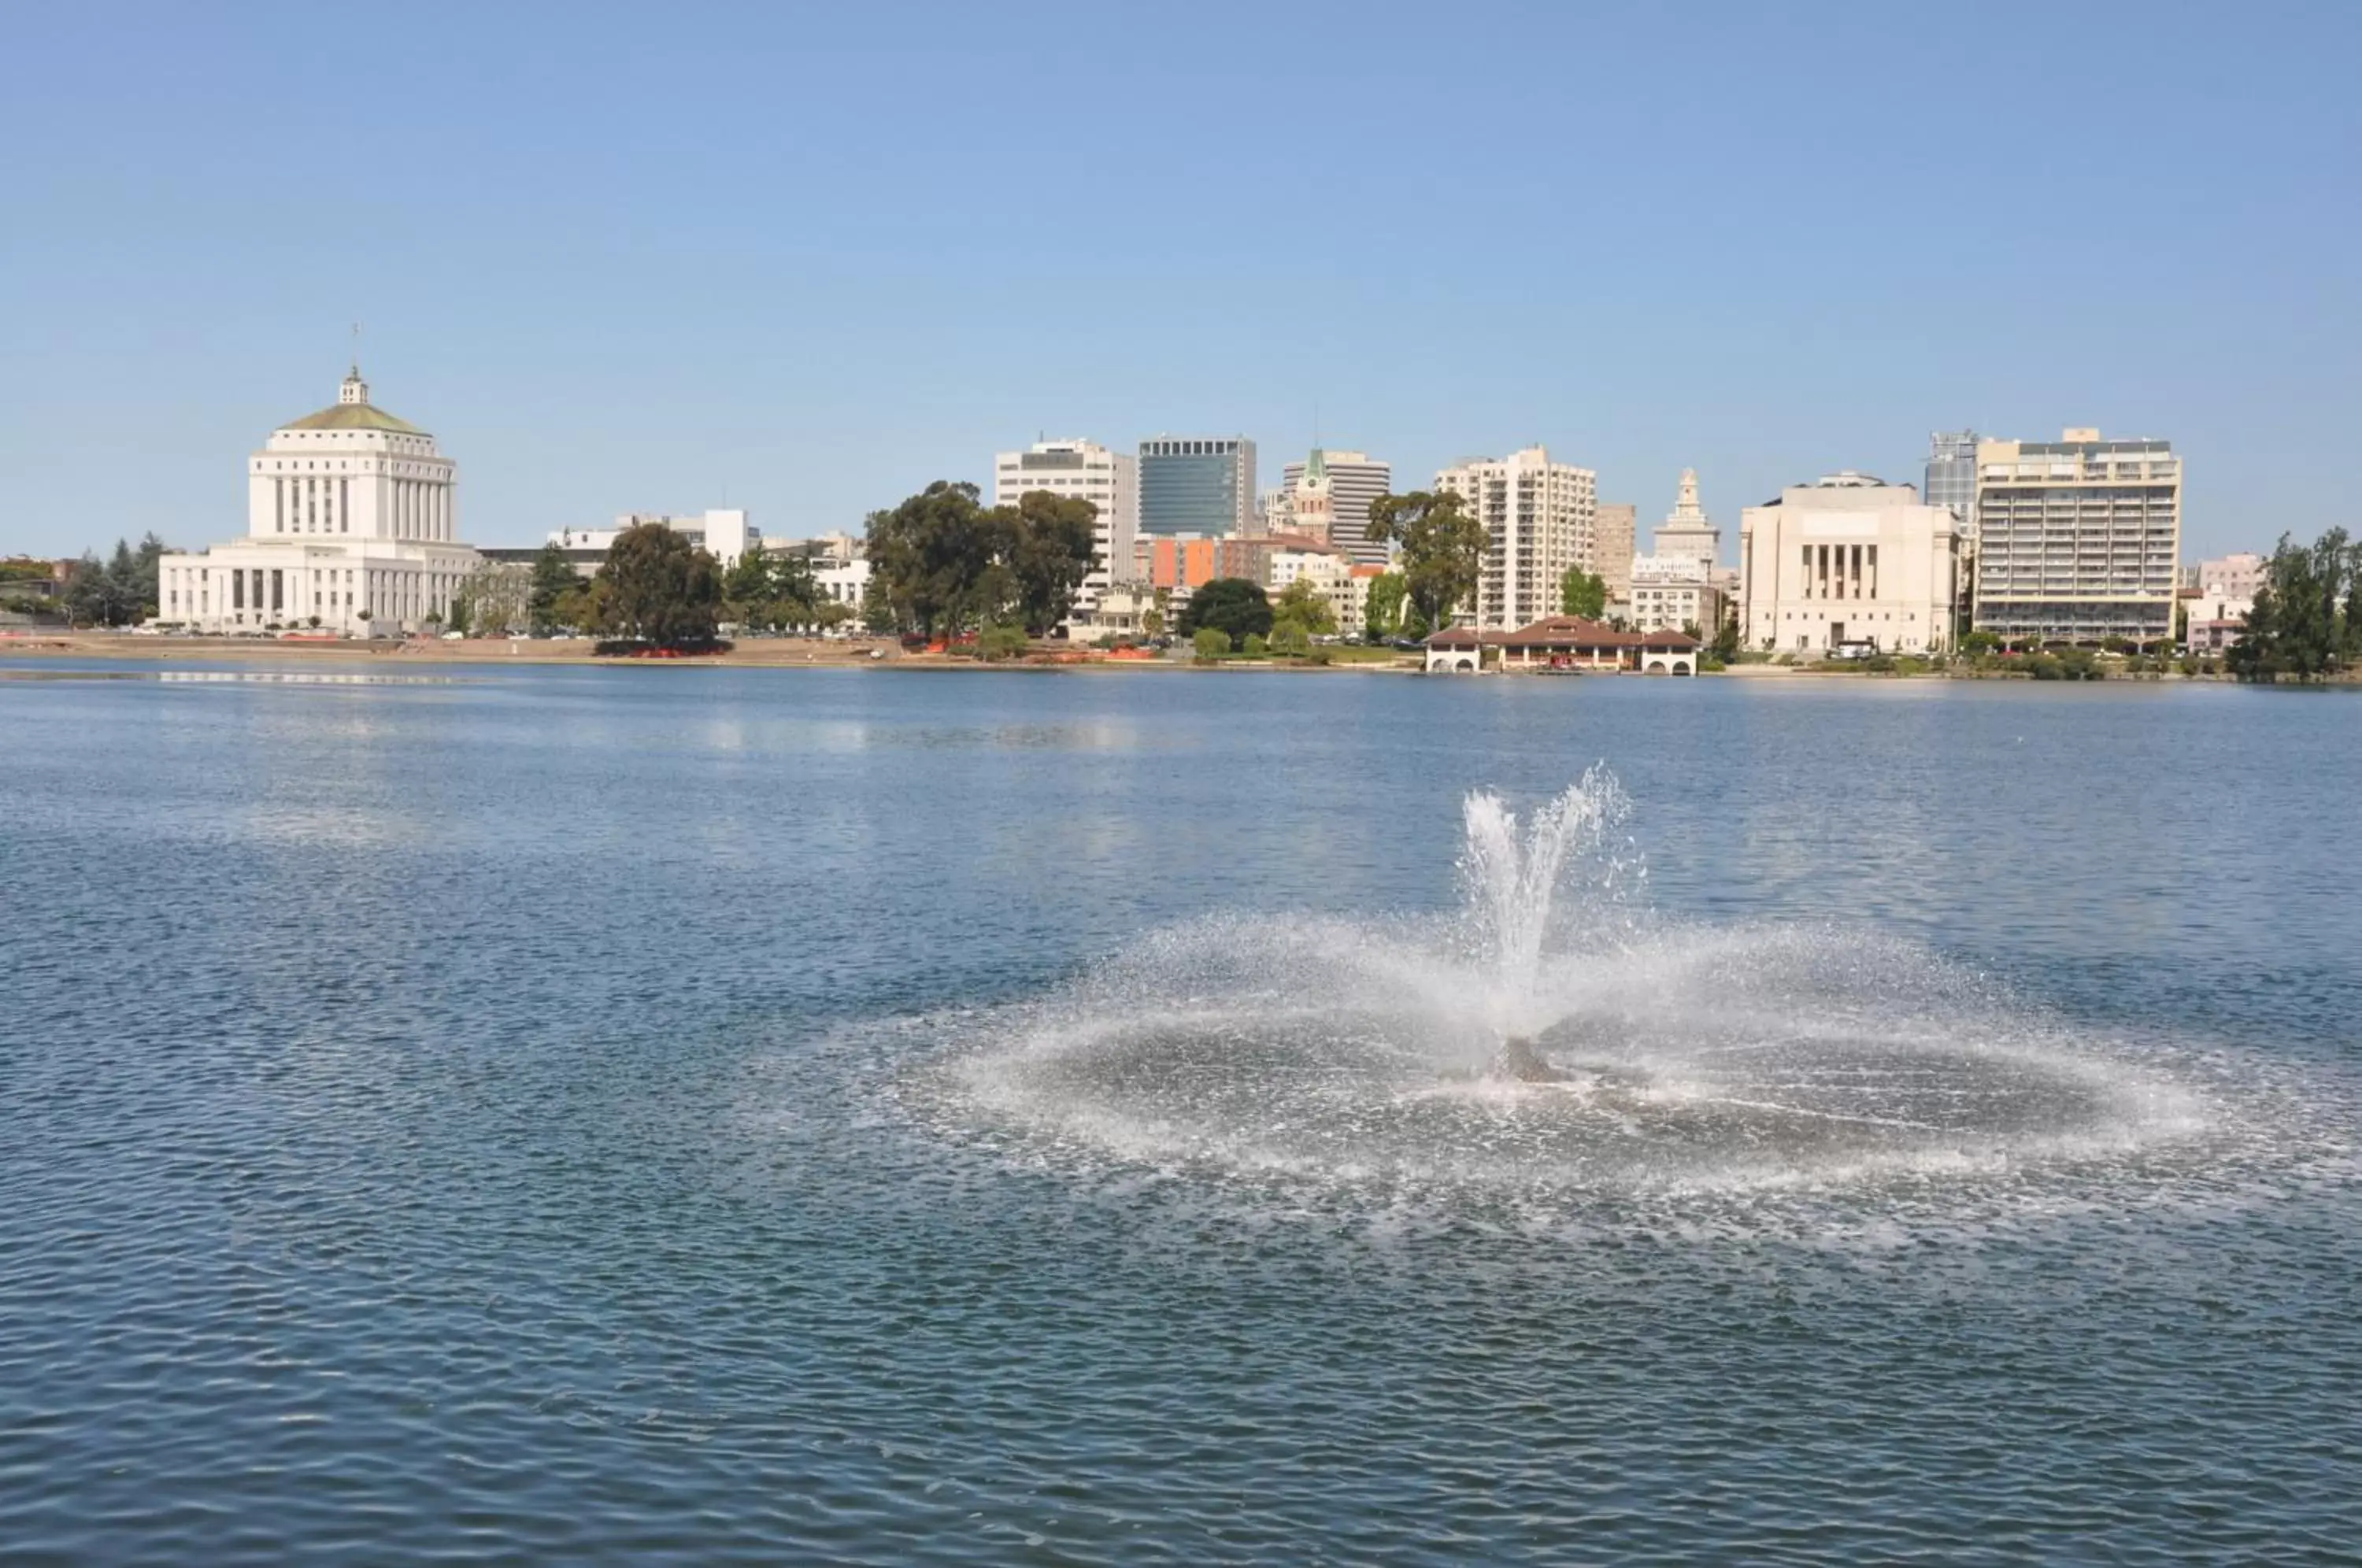 Area and facilities in Americas Best Value Inn - Downtown Oakland/Lake Merritt